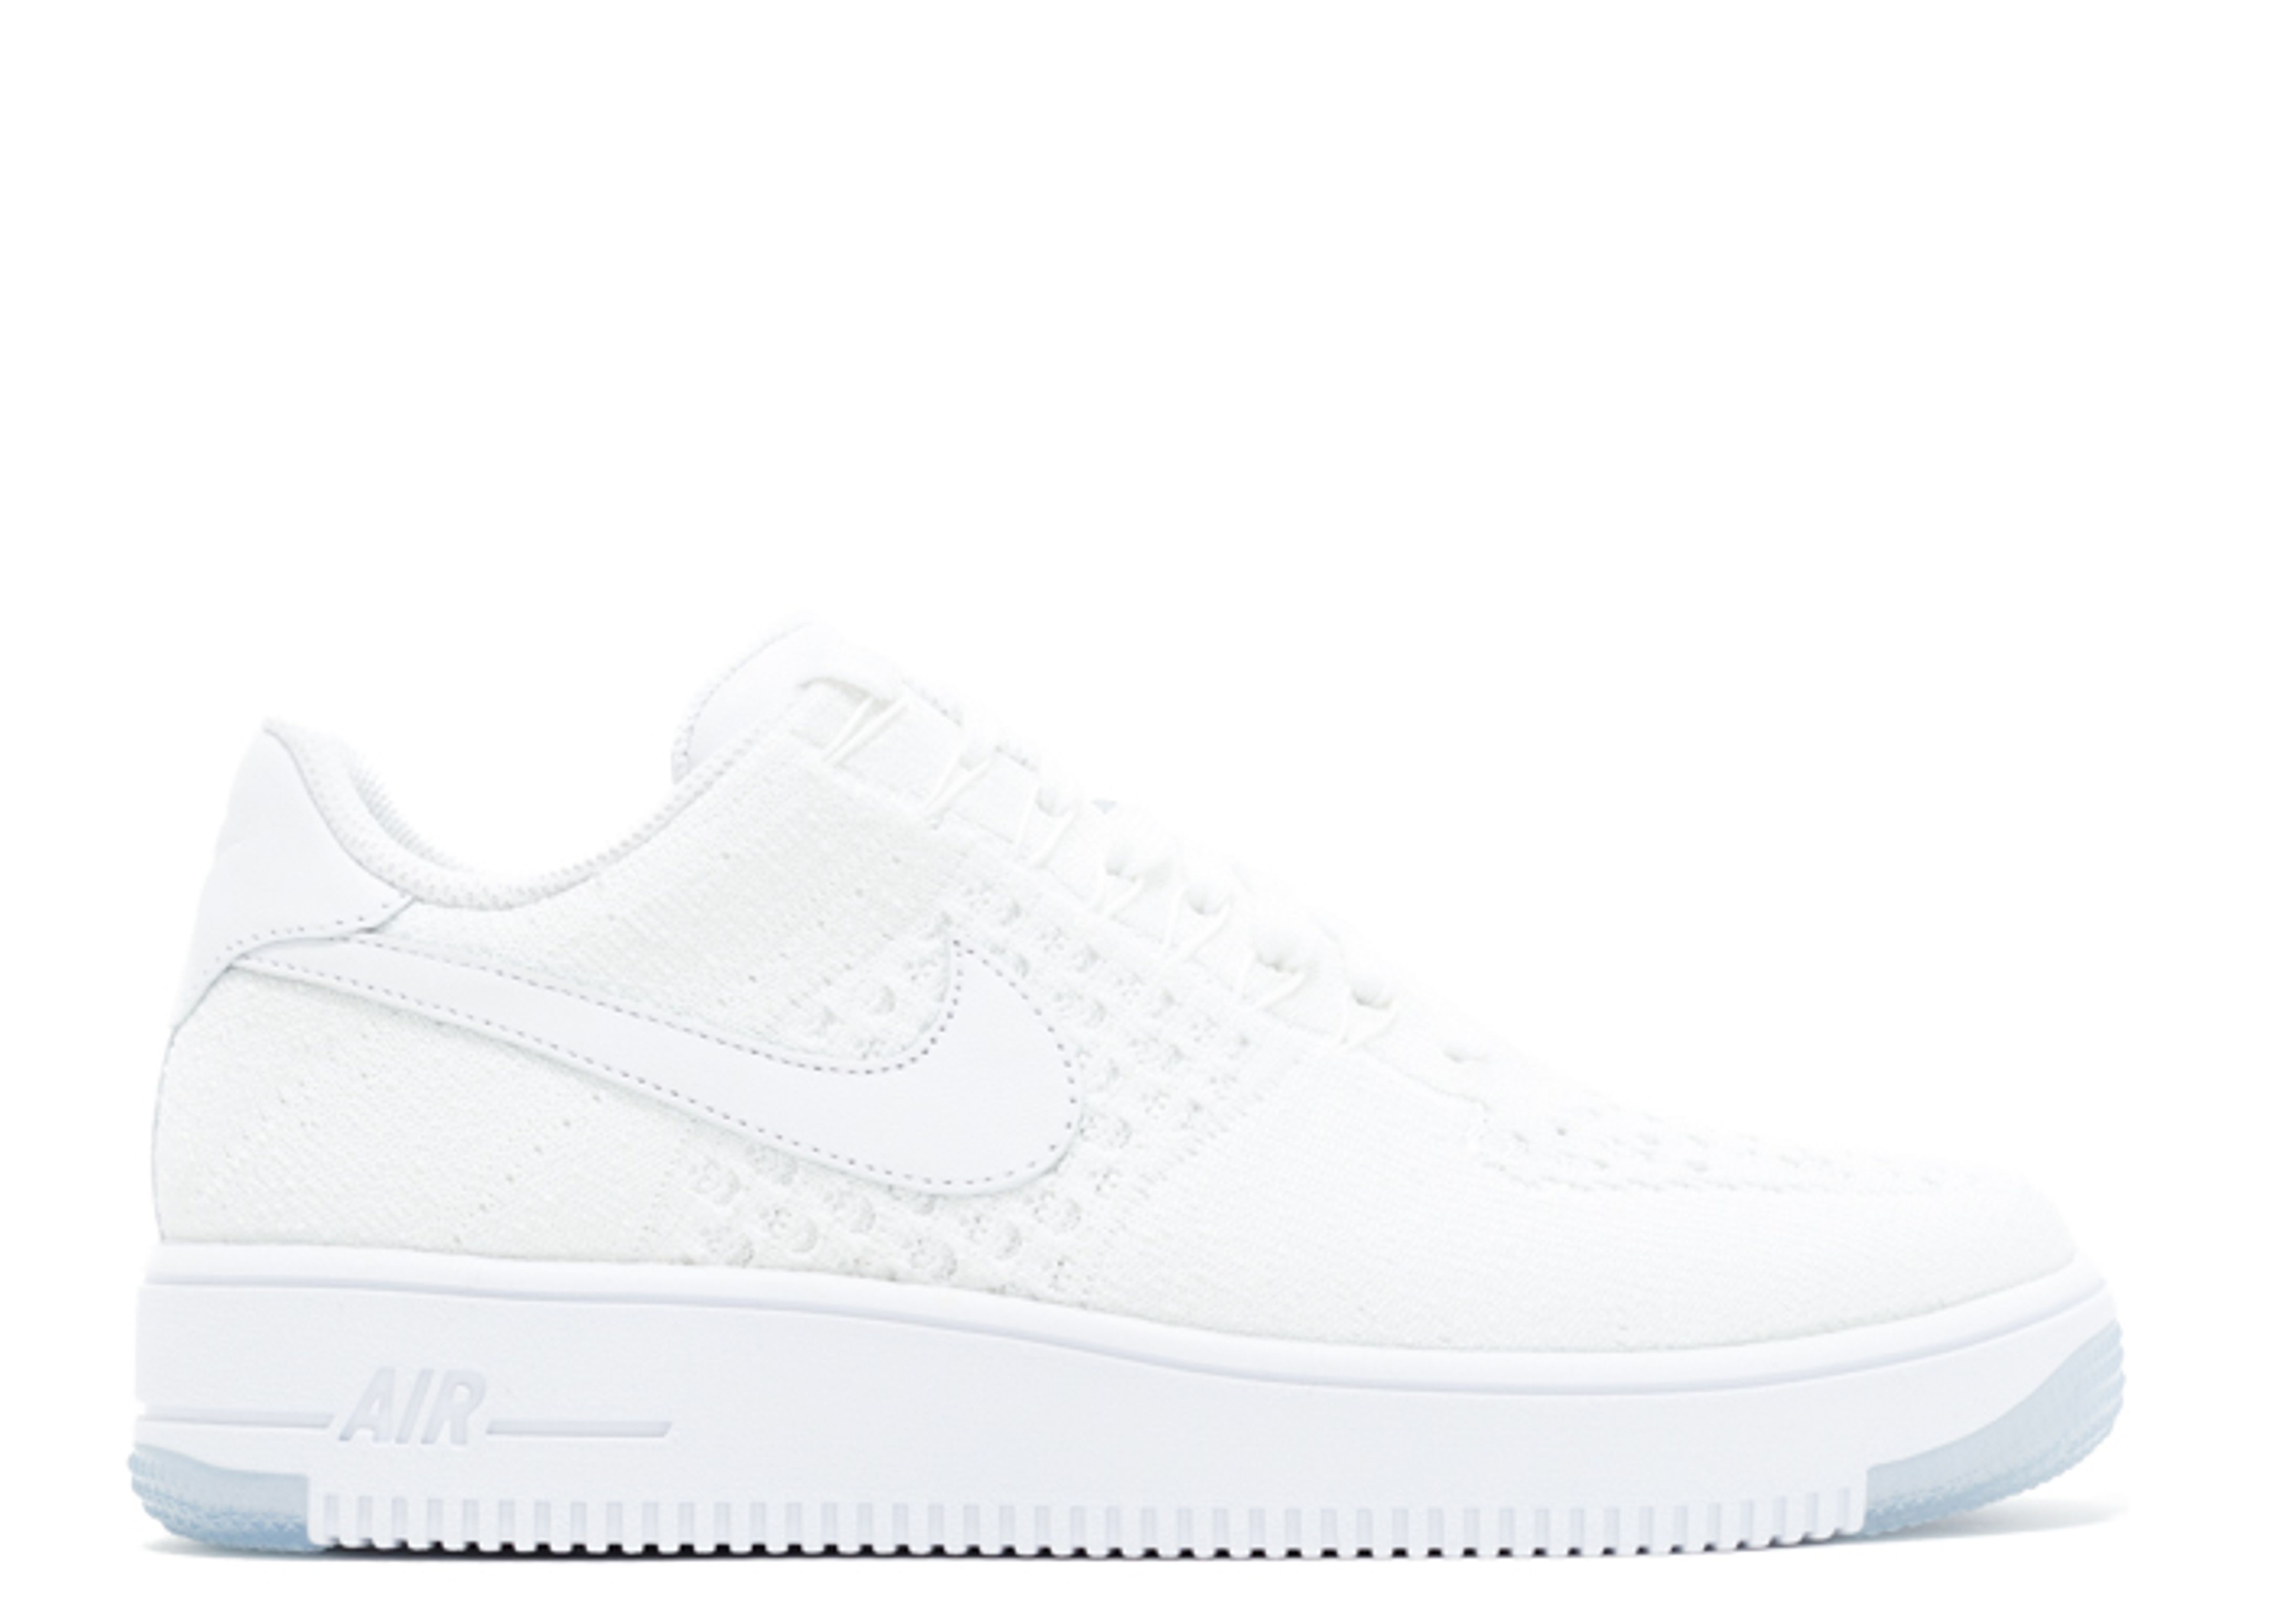 Nike Air Force 1 Ultra flyknit Low Sunset Tint / Sail - 817419-601